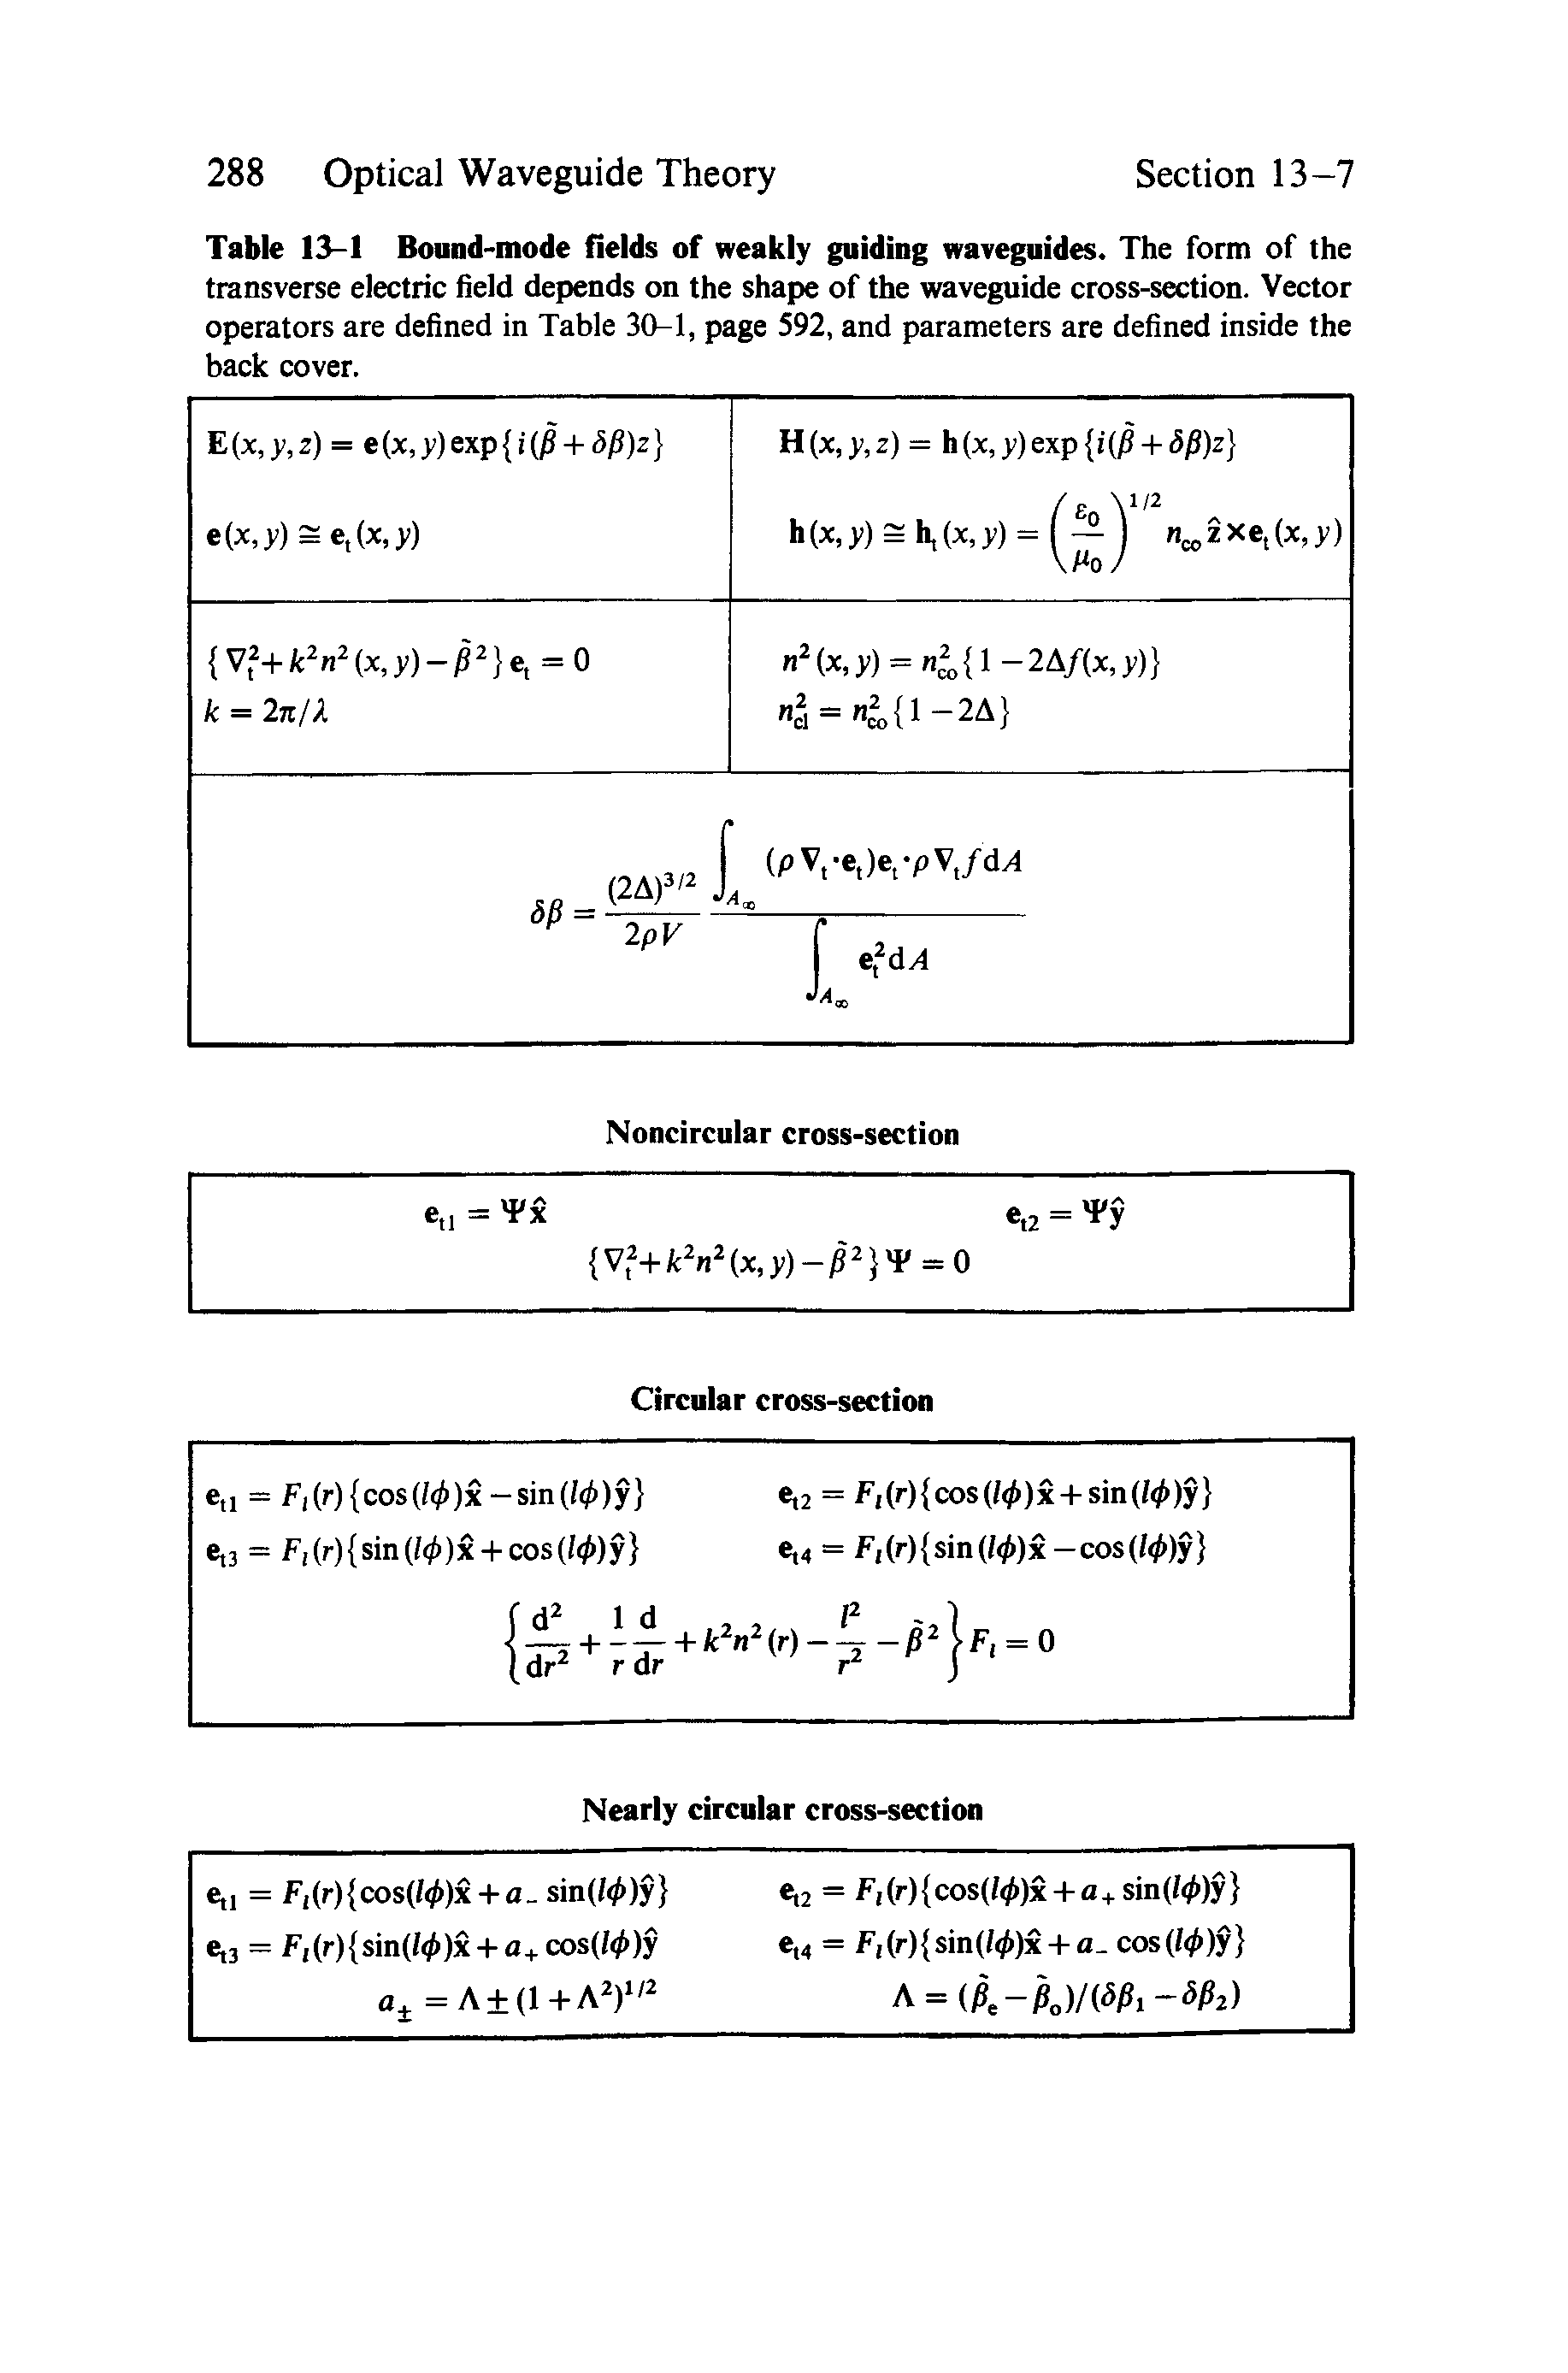 Table 13-1 Boond-mode flelds of weakly guiding waveguides. The form of the transverse electric field depends on the shape of the waveguide cross-section. Vector operators are defined in Table 30-1, page S92, and parameters are defined inside the back cover.